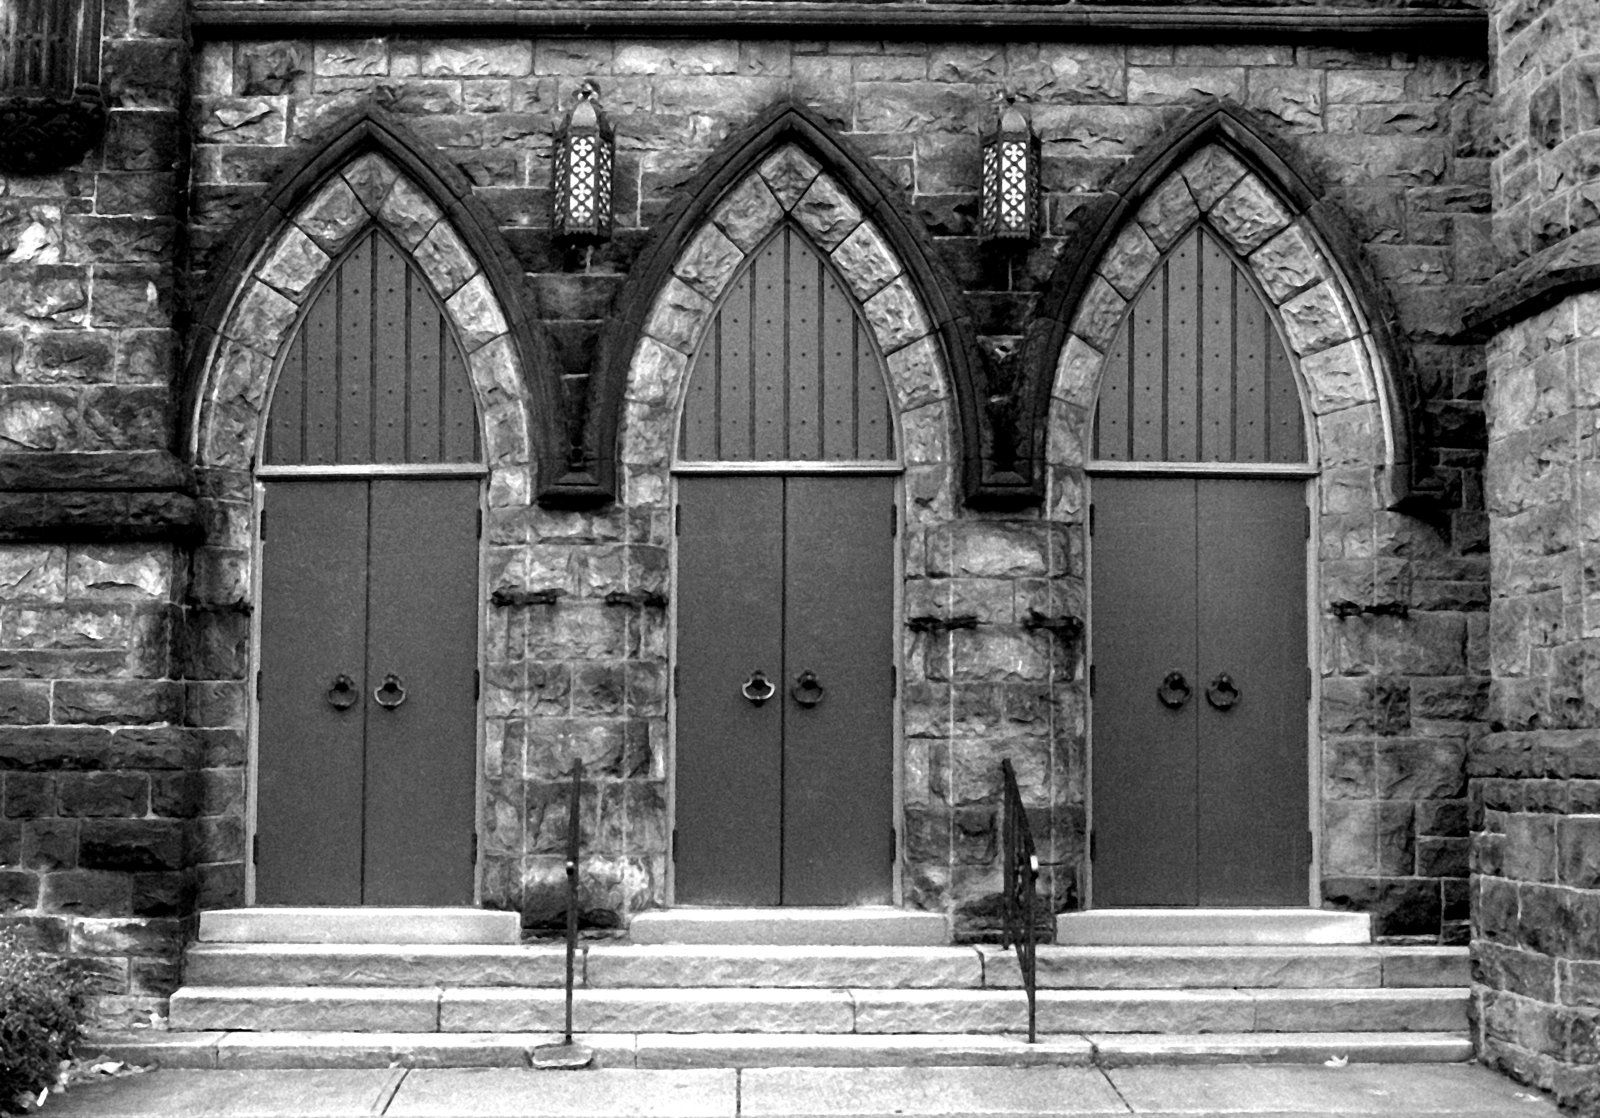 the two arched doors are located in the old building